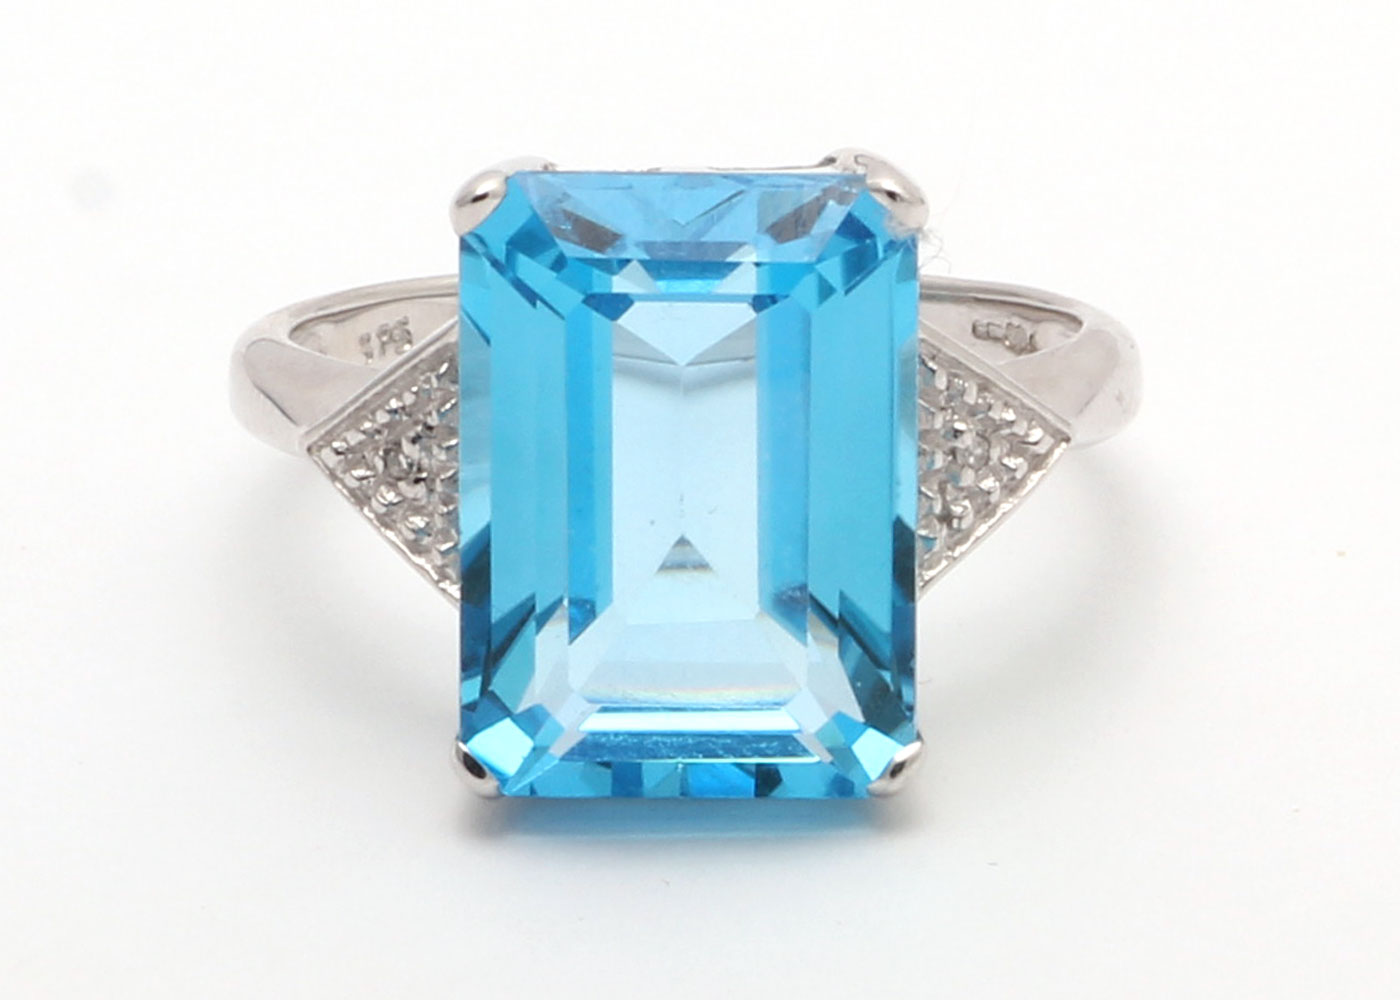 9ct White Gold Diamond And Blue Topaz Ring 8.25 Carats - Image 5 of 6